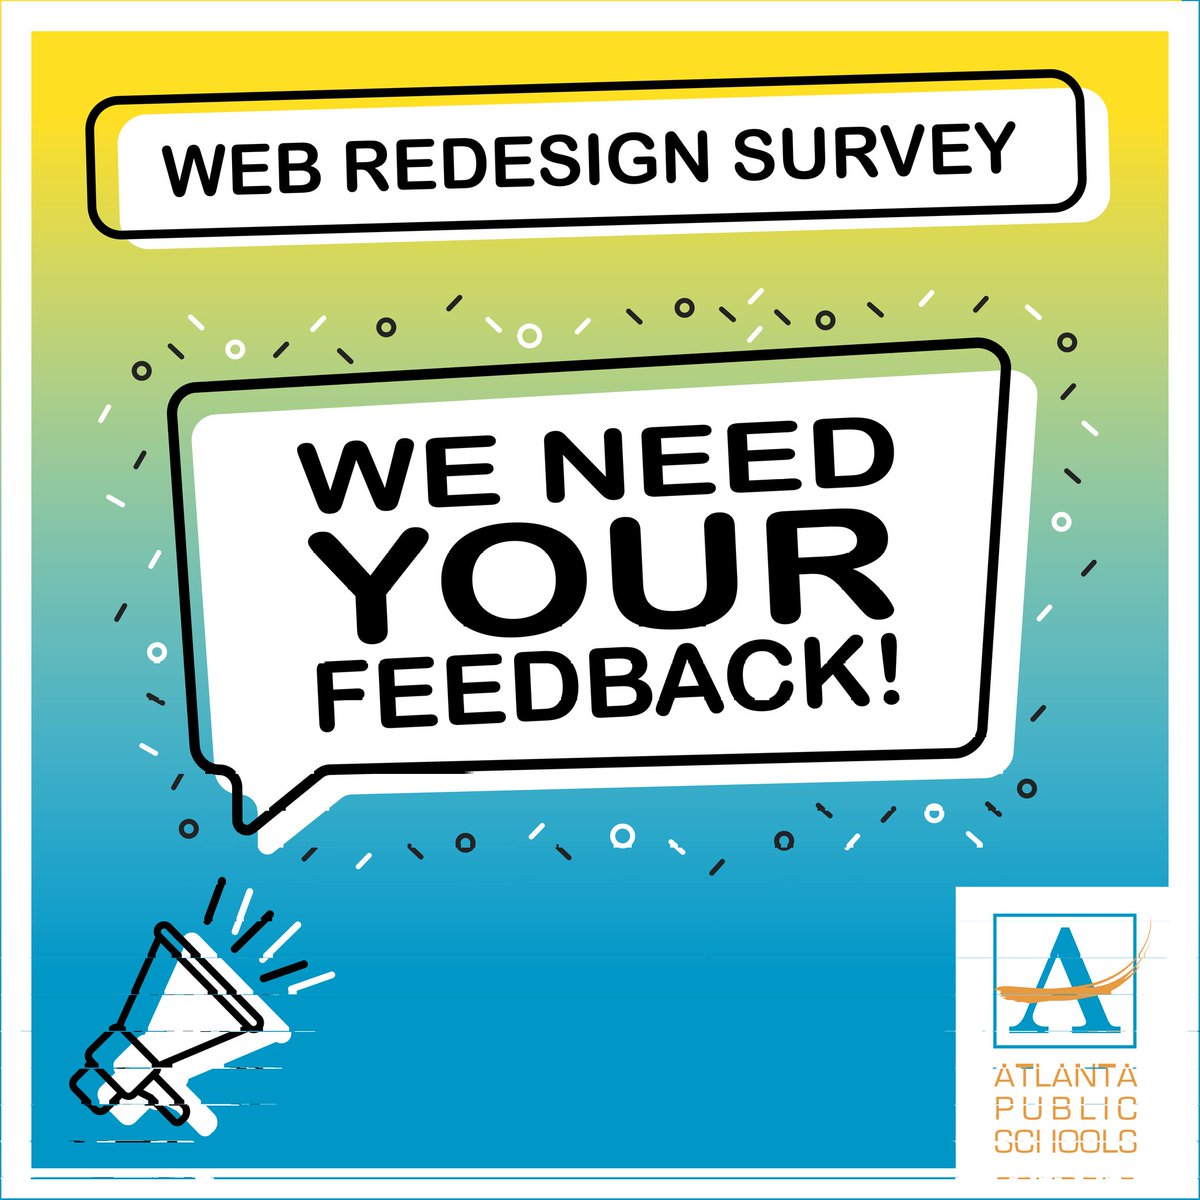 Attention APS community! We need your input for our website redesign project. Take a few minutes to complete our survey and help us create a more user-friendly and informative website. surveymonkey.com/r/22H8HRY